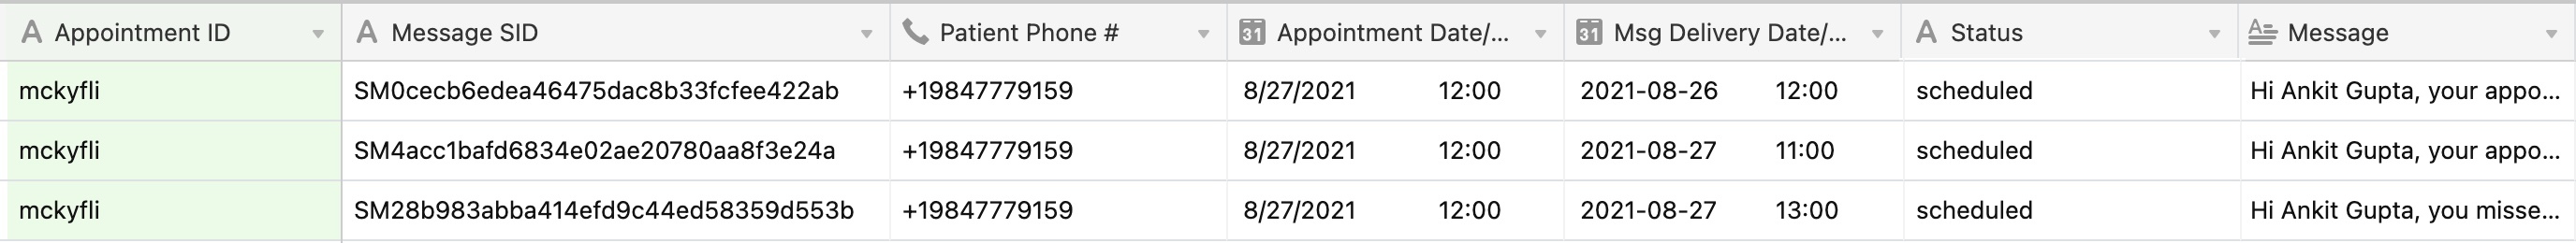 Screenshot of system of record showing appointment ID, appointment date/time, scheduled message delivery date/time, status, and message